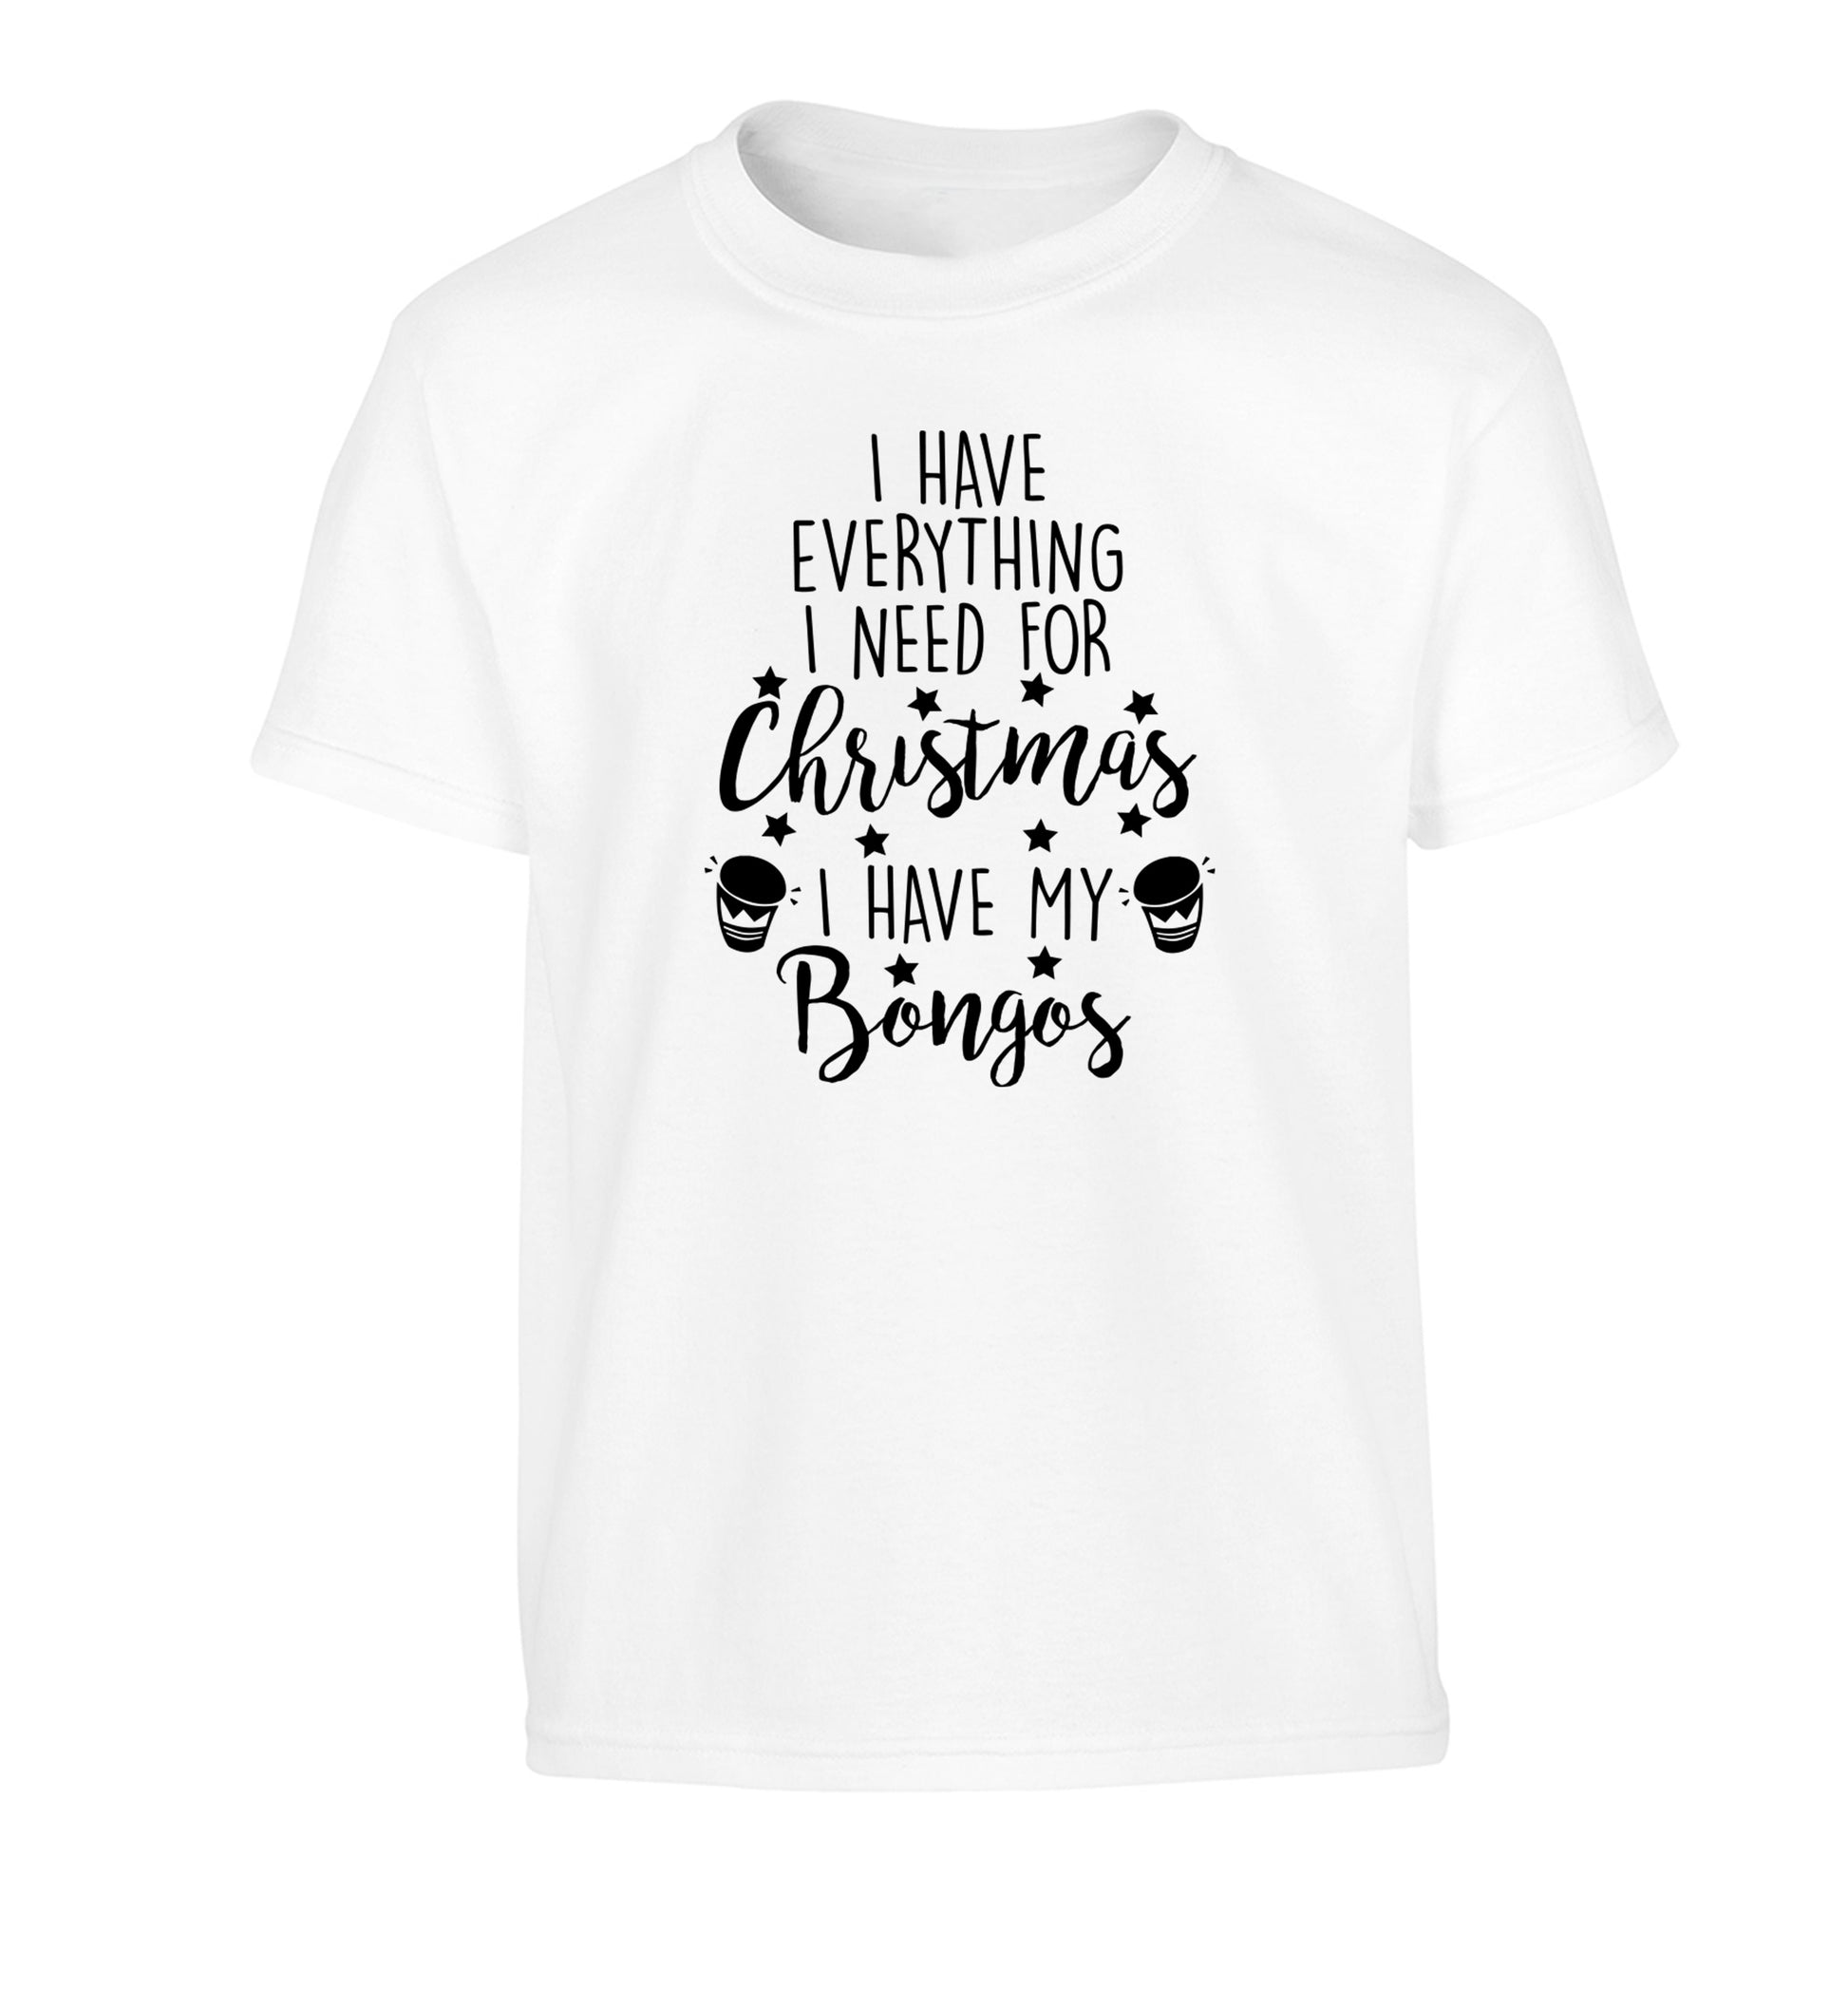 I have everything I need for Christmas I have my bongos! Children's white Tshirt 12-14 Years